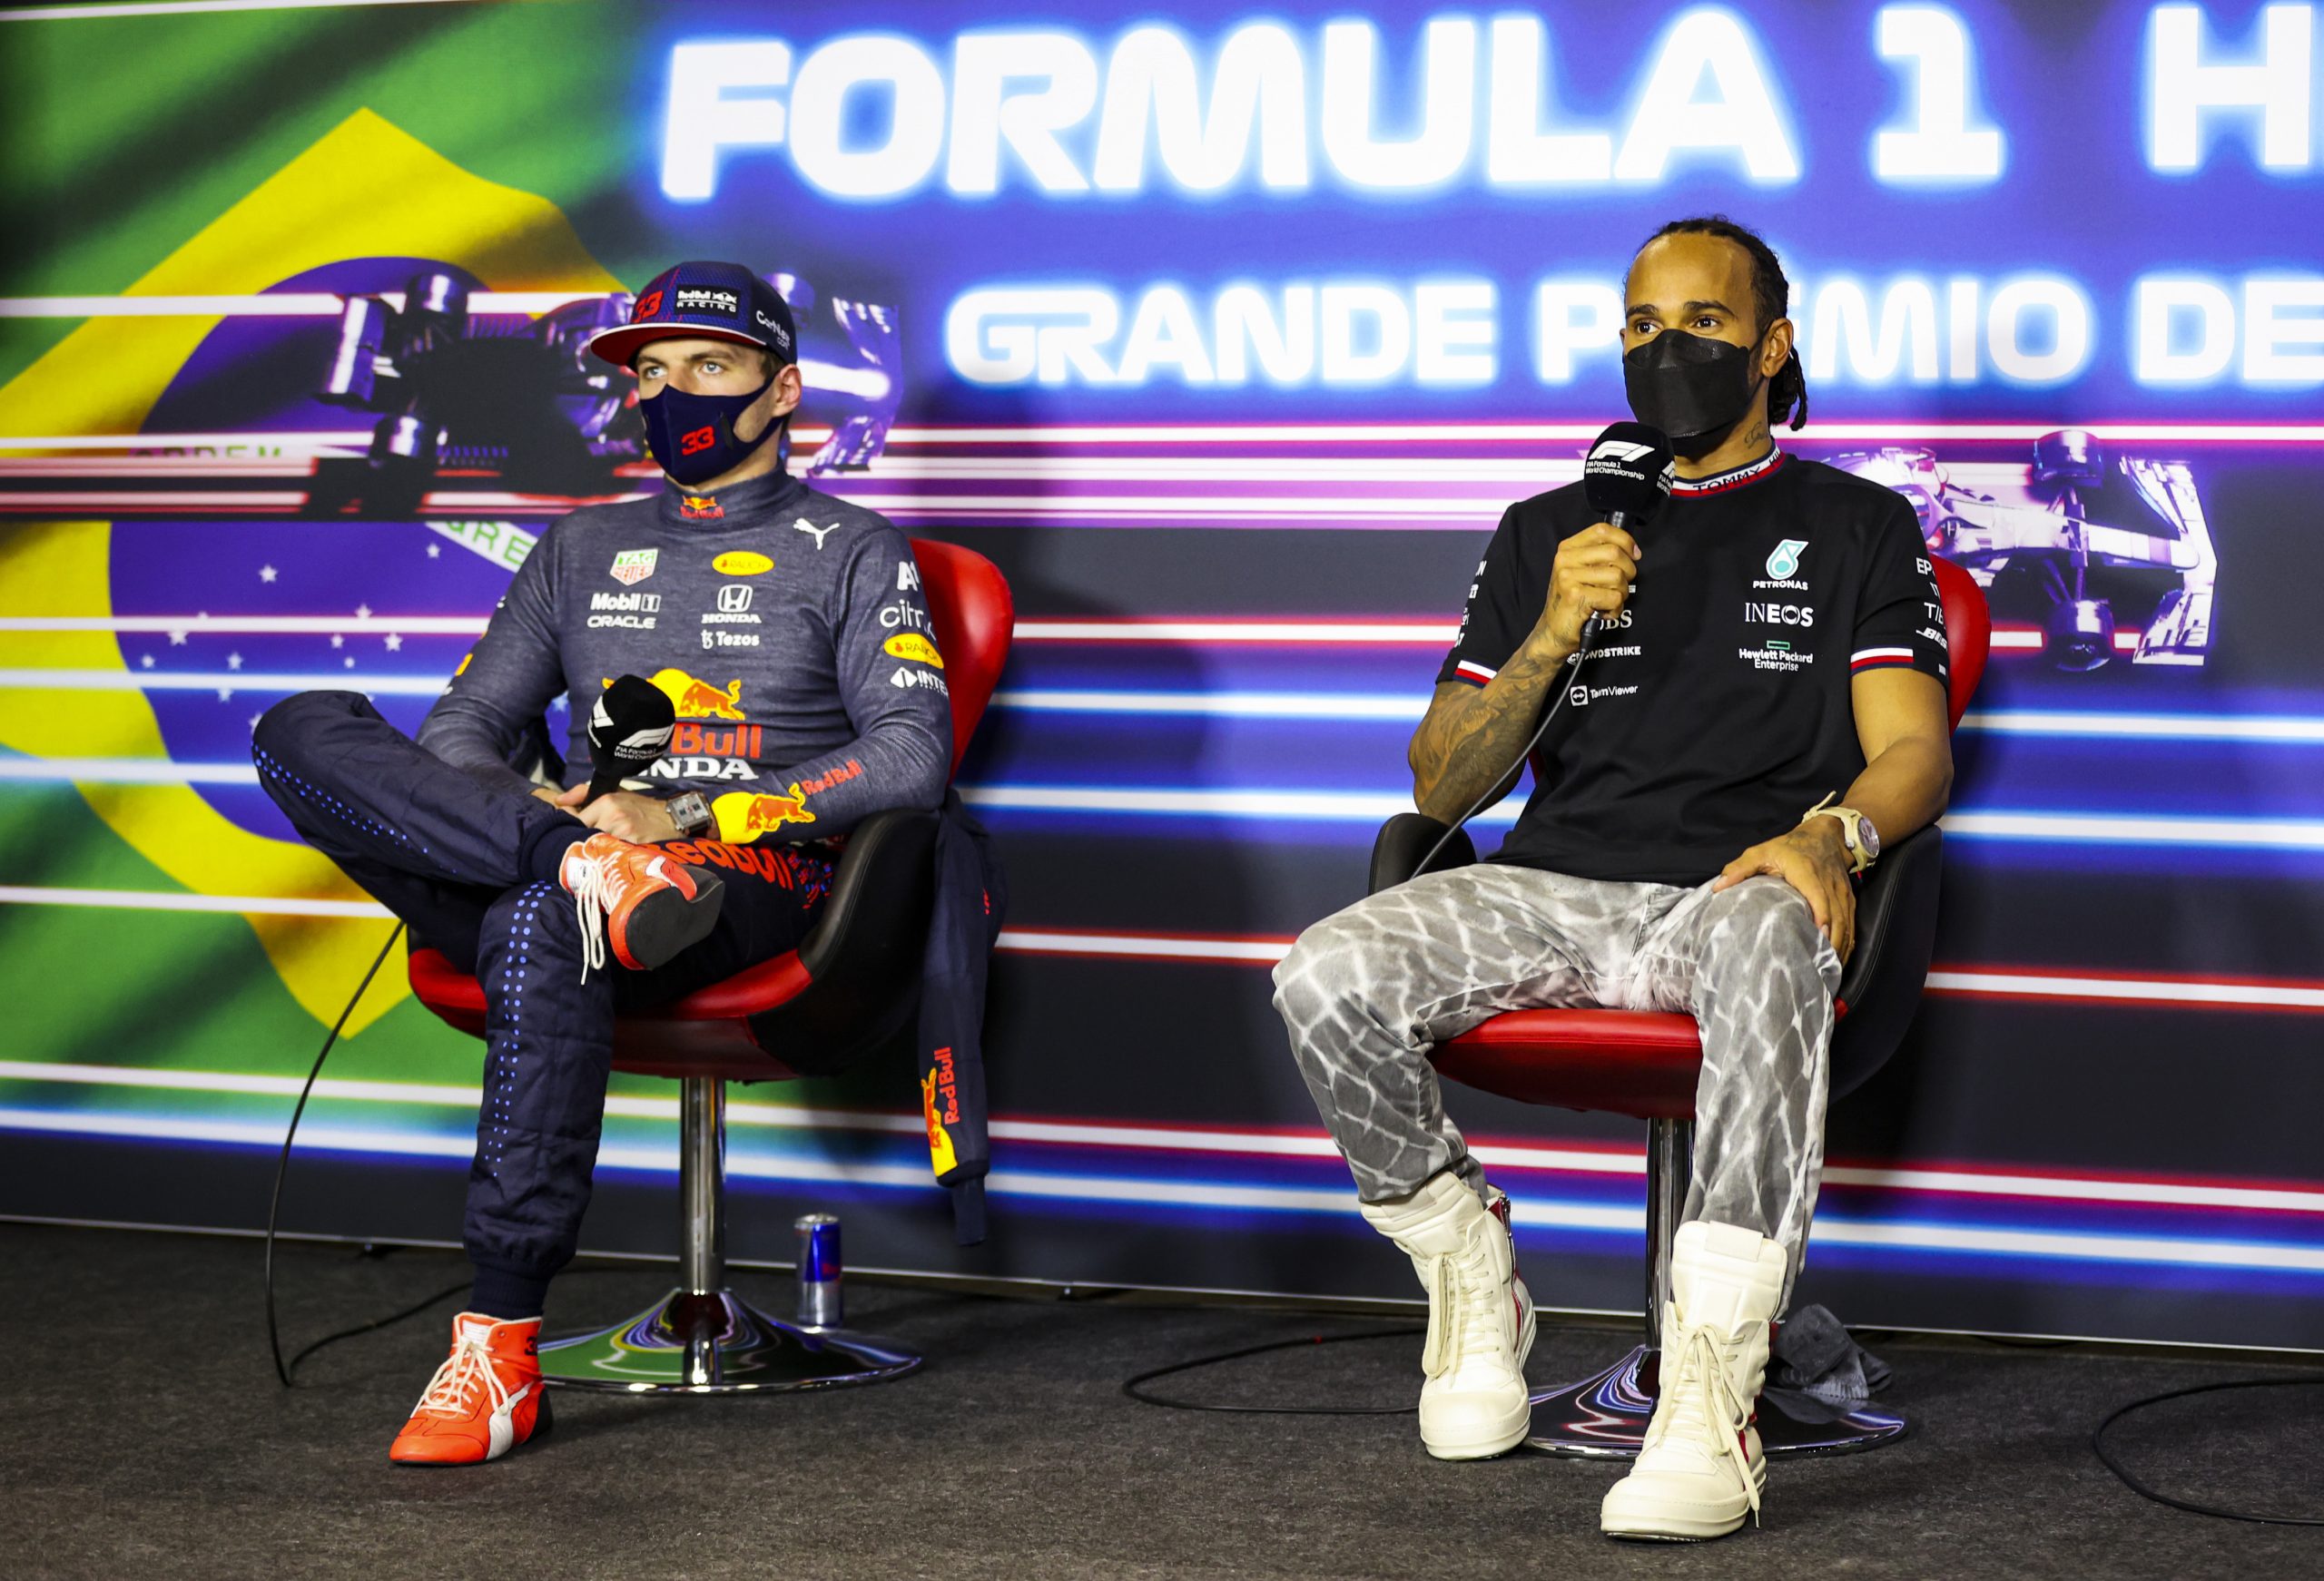 Lewis Hamilton of Mercedes second placed Max Verstappen Red Bull Racing talk in the press conference after the F1 Grand Prix of Brazil, 2021